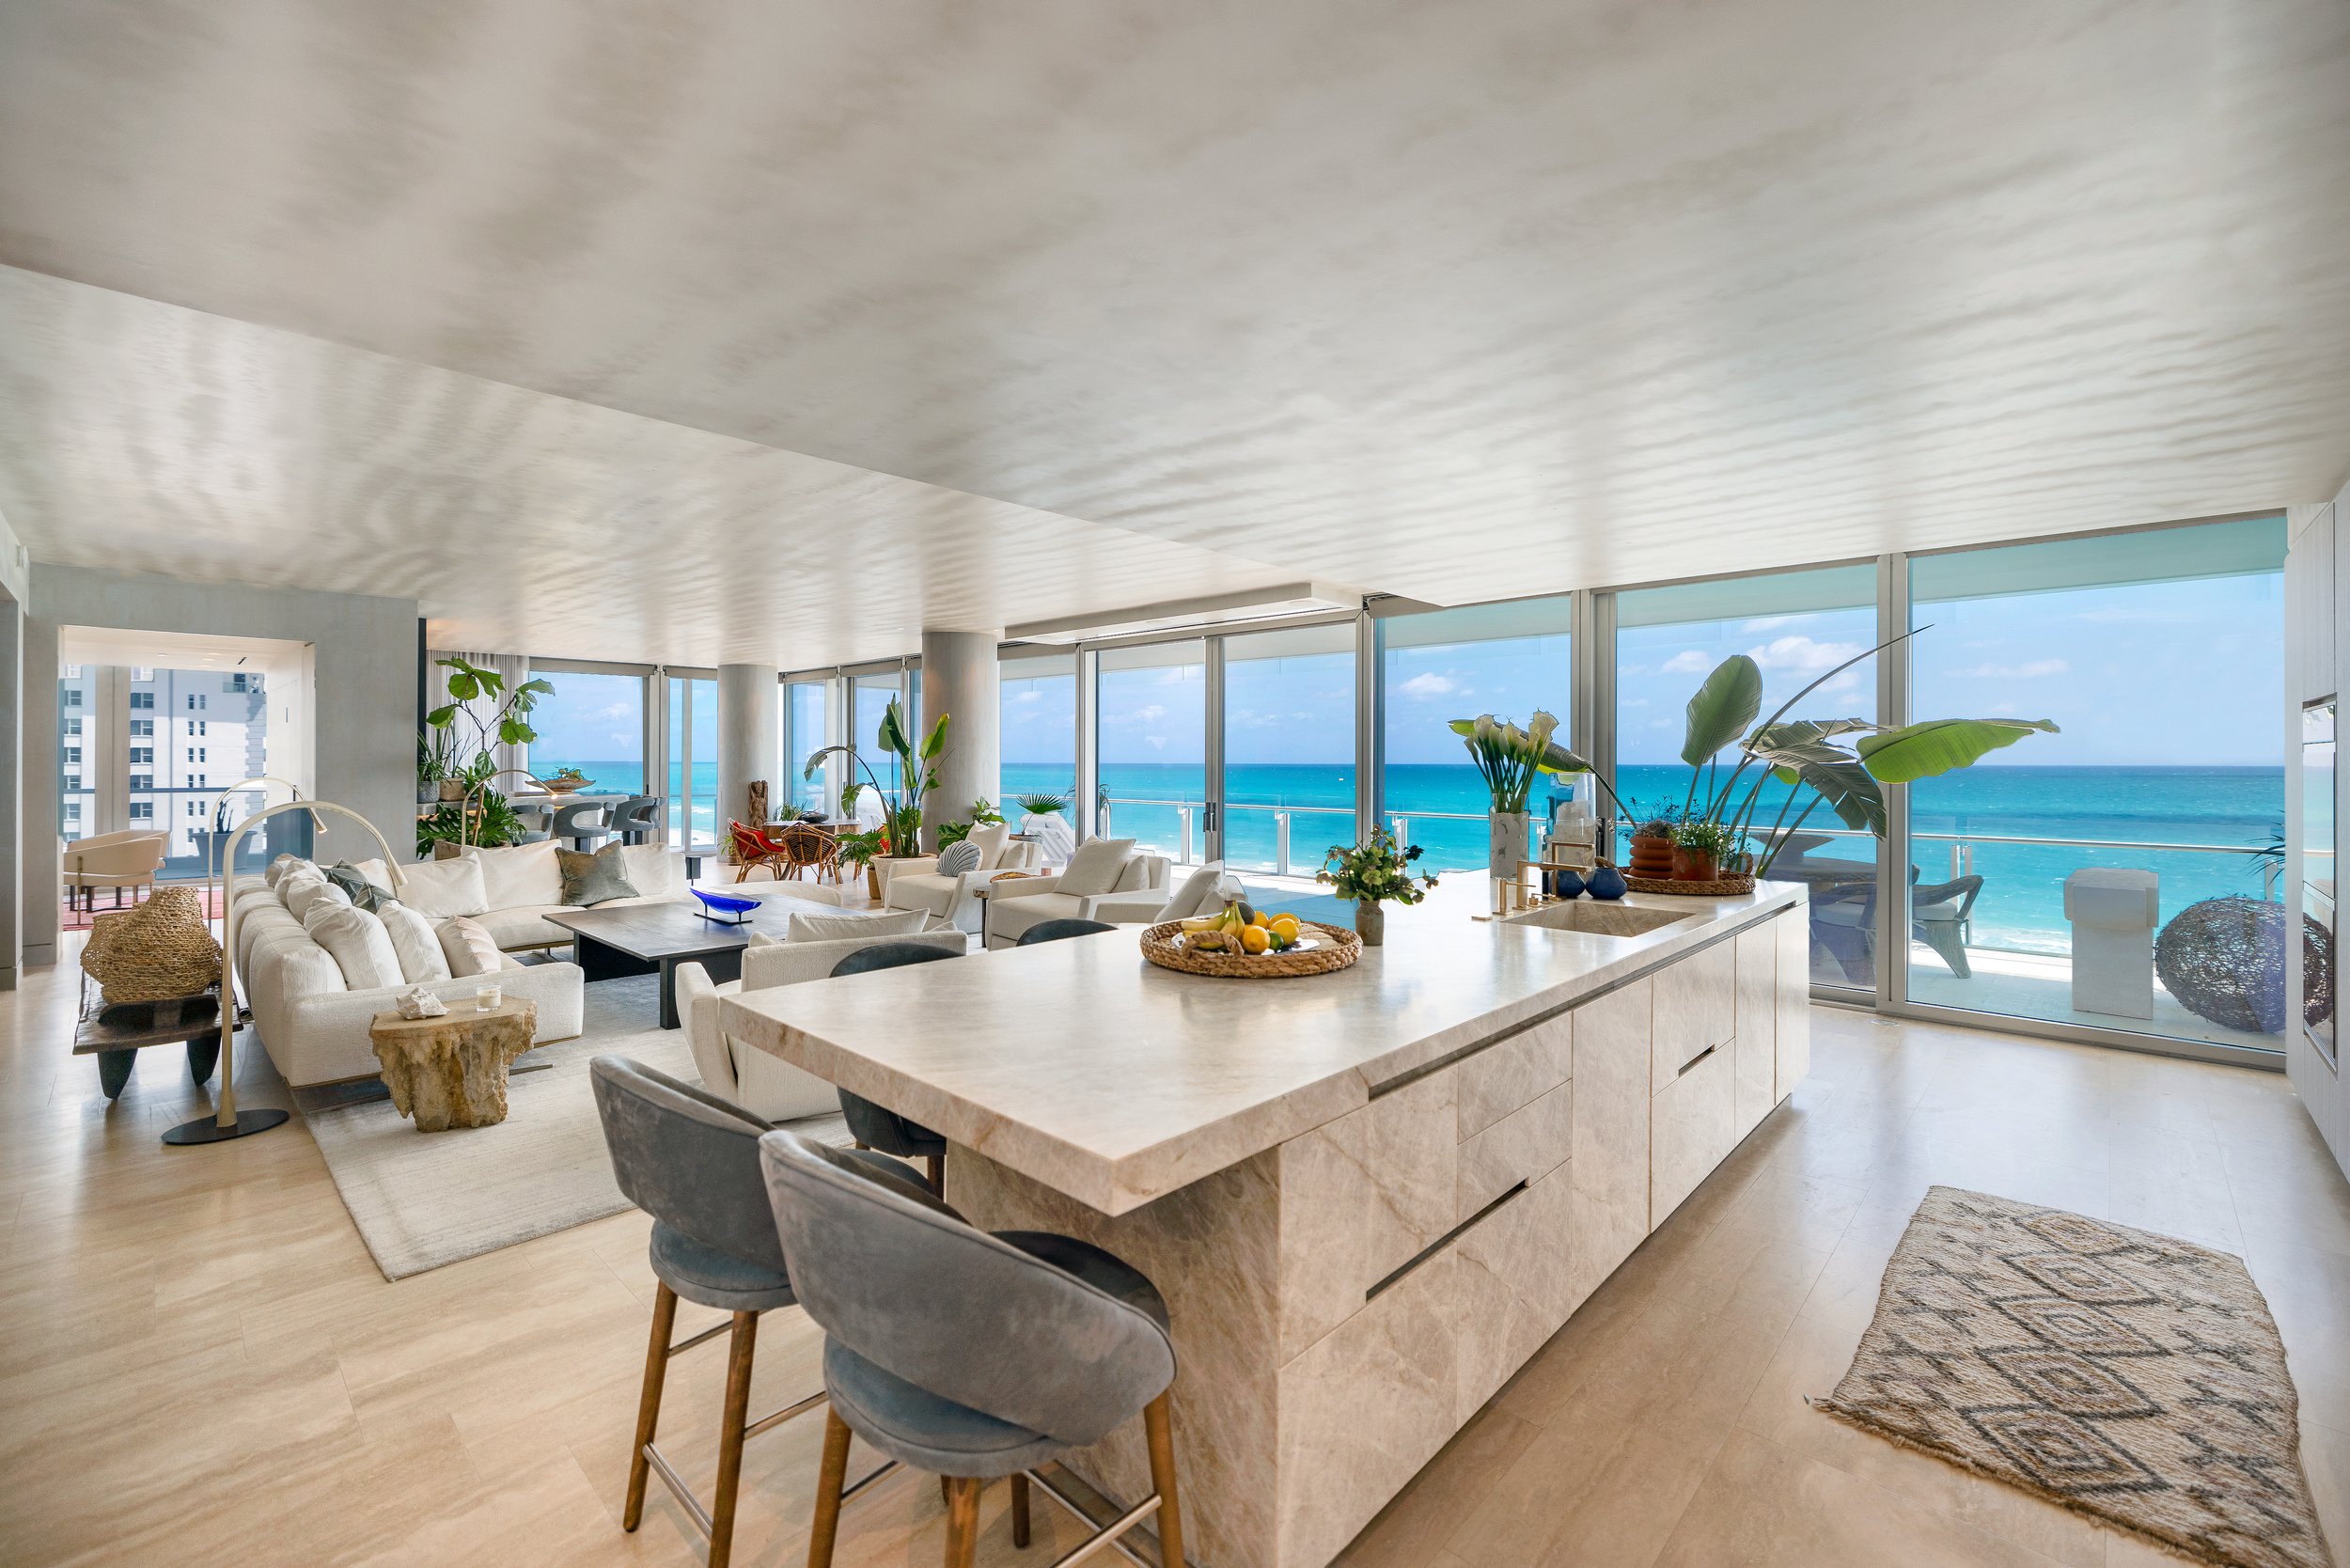 Check Out This Lavish Condo With Custom Wave Ceilings Asking $37 Million At Four Seasons at The Surf Club In Surfside 2.jpg